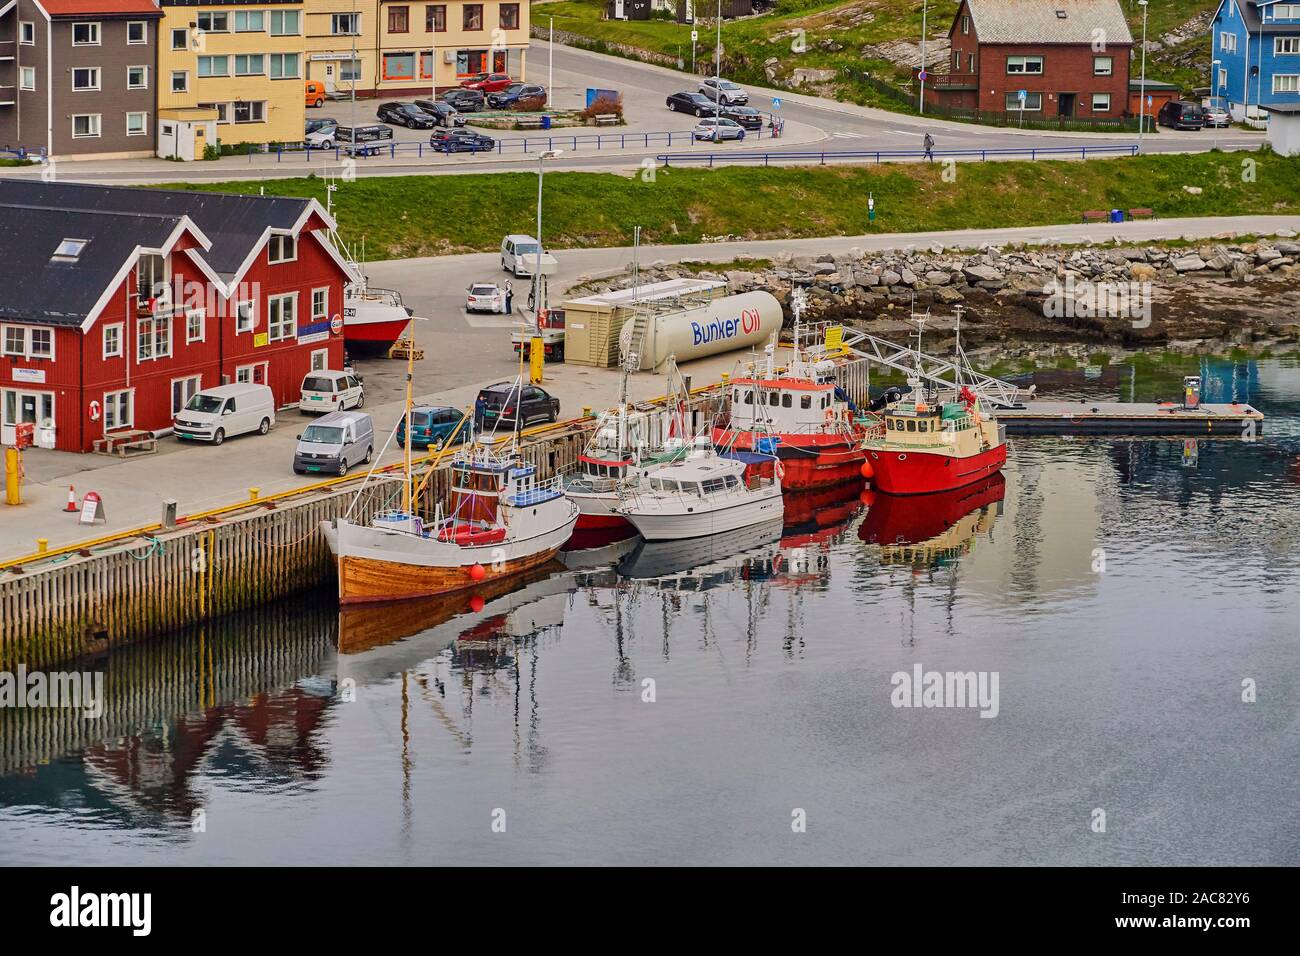 Hammerfest  Norway.the city of Hammerfest Norway is the northernmost city in Europe  Located well above the Arctic Circle the city is in the 'Land of Stock Photo